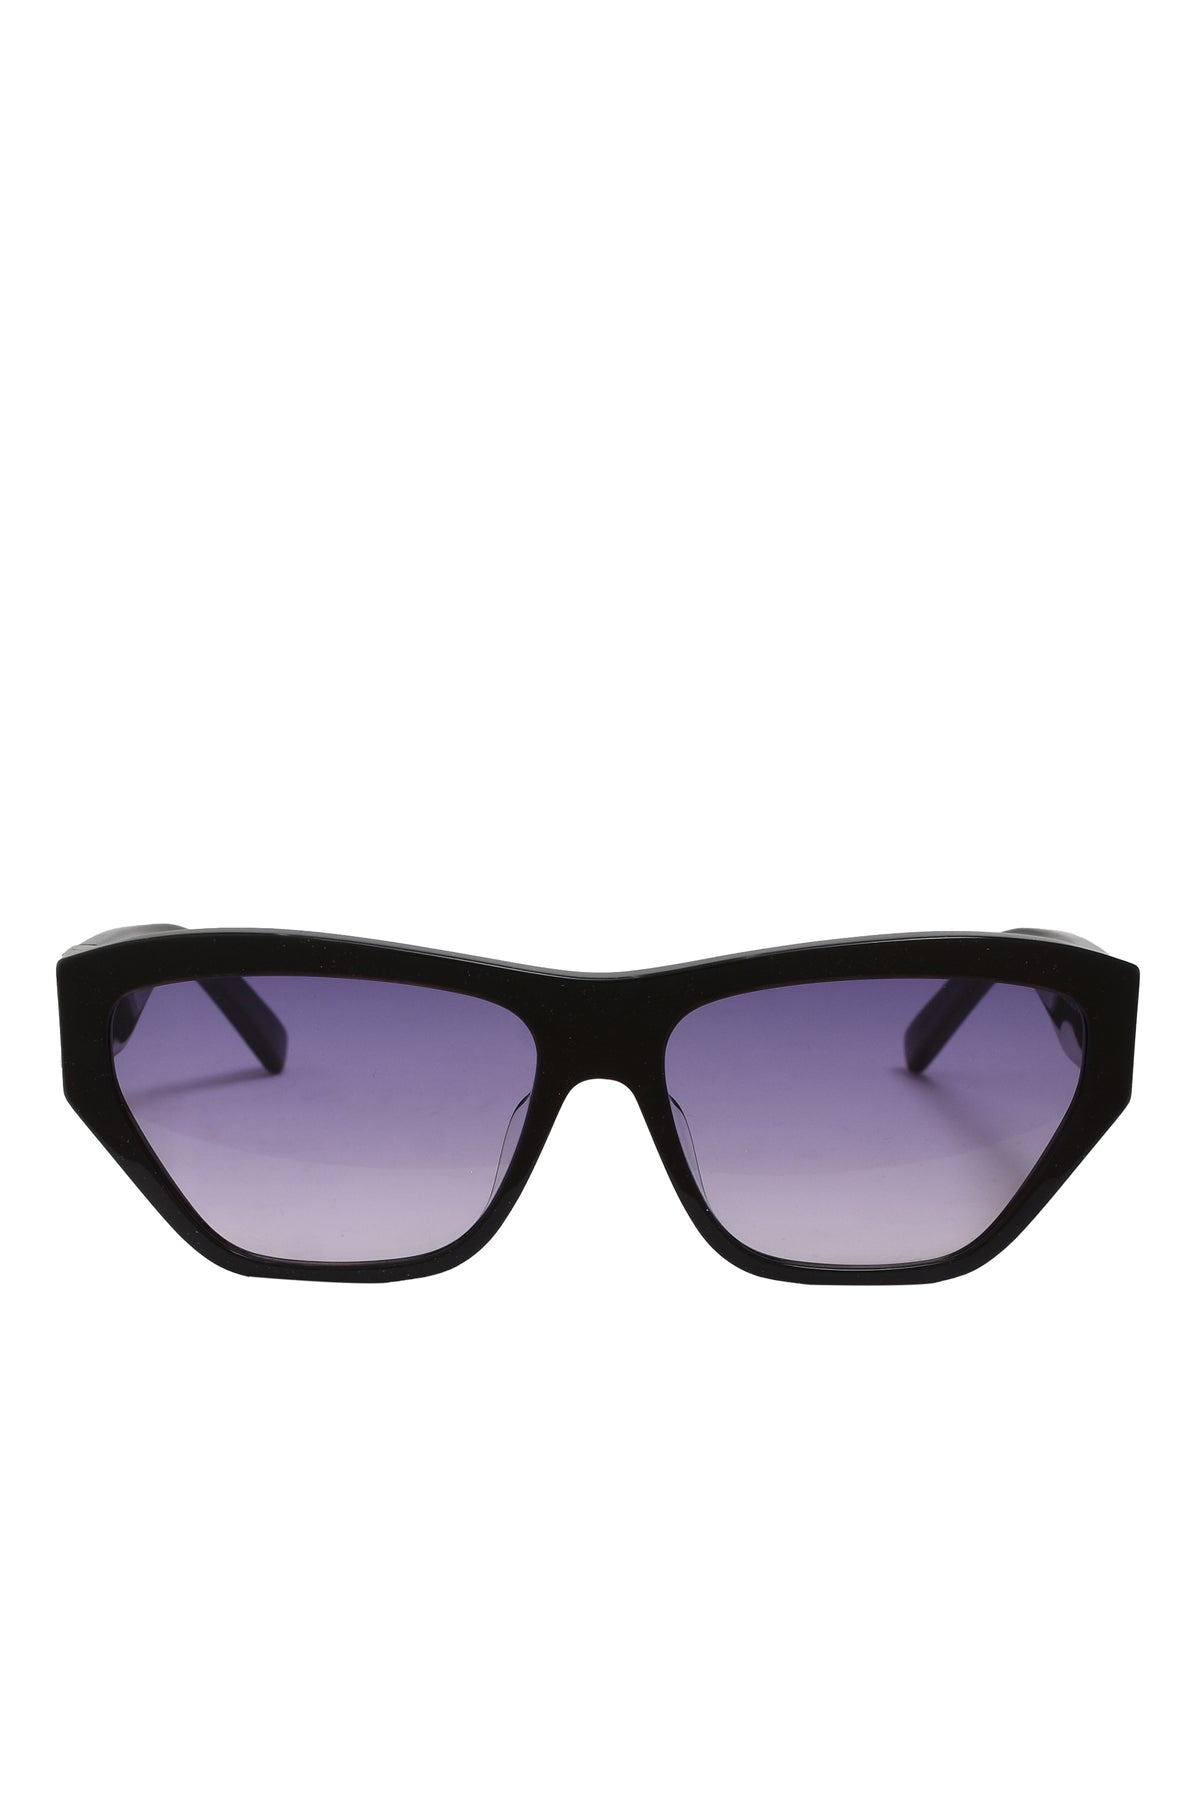 SUNGLASSES/BLK/OTHER/GRADIENT OR MIRROR VIOLET